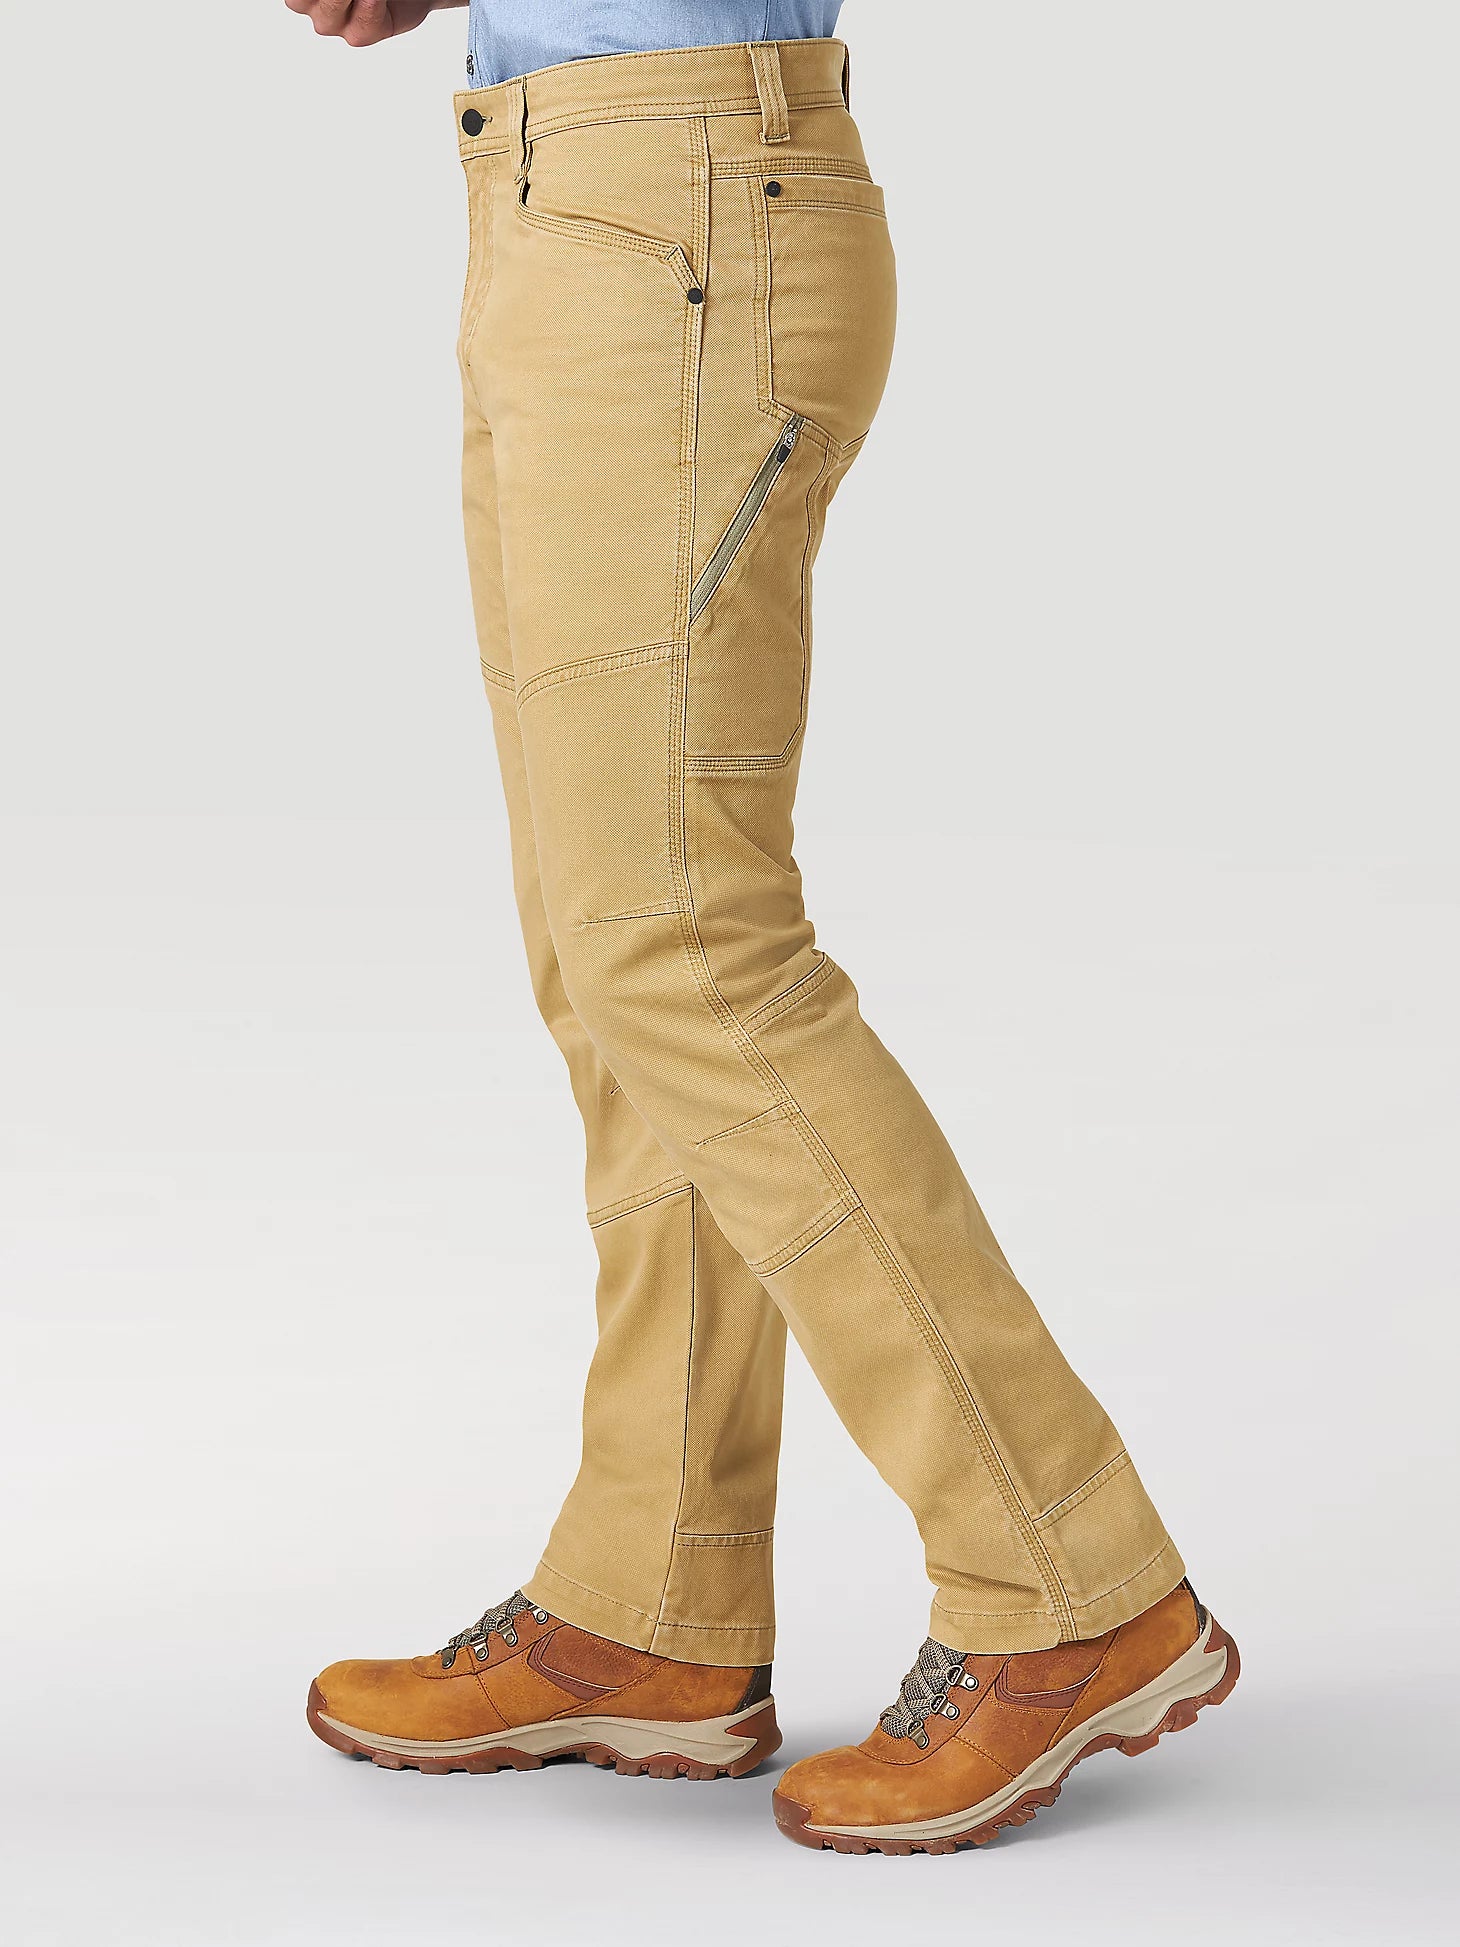 ATG BY WRANGLER™ MEN'S REINFORCED UTILITY PANT - KELP – Lazarus of Moultrie